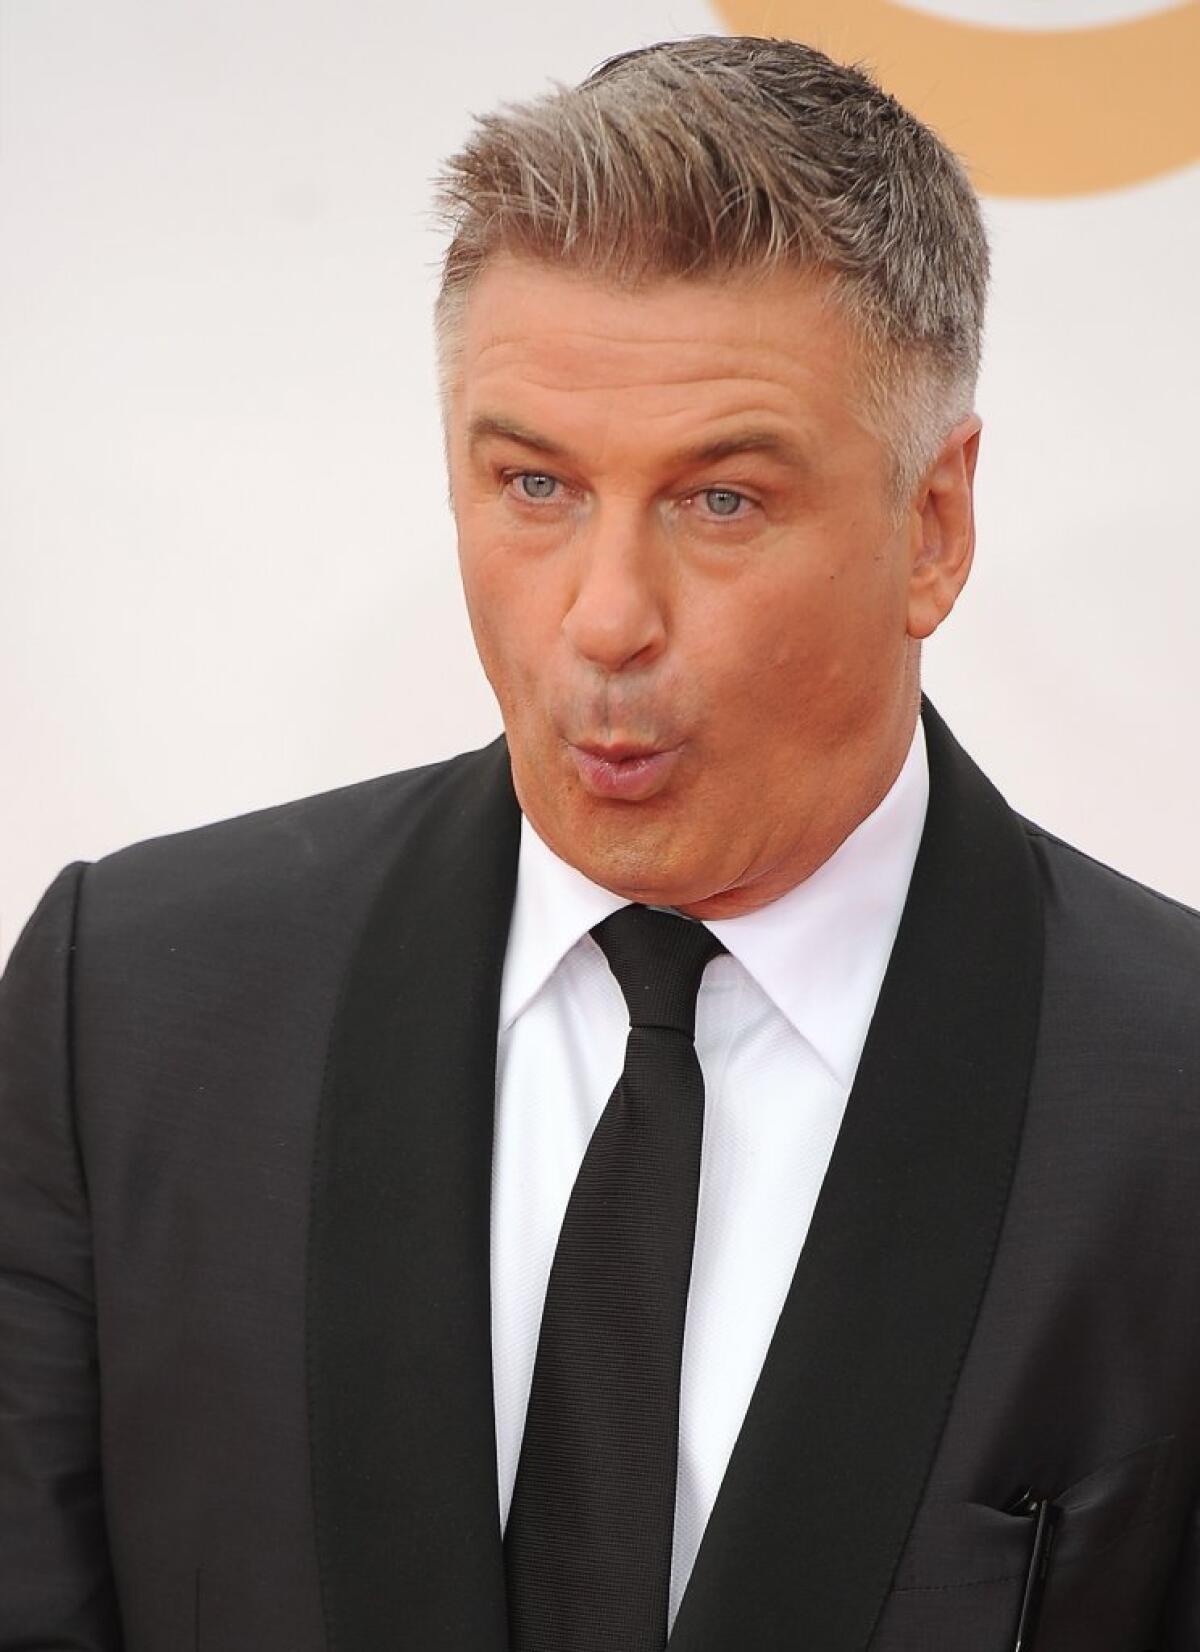 Alec Baldwin is blaming the media for his latest verbal outburst, which has endangered his MSNBC show "Up Late."